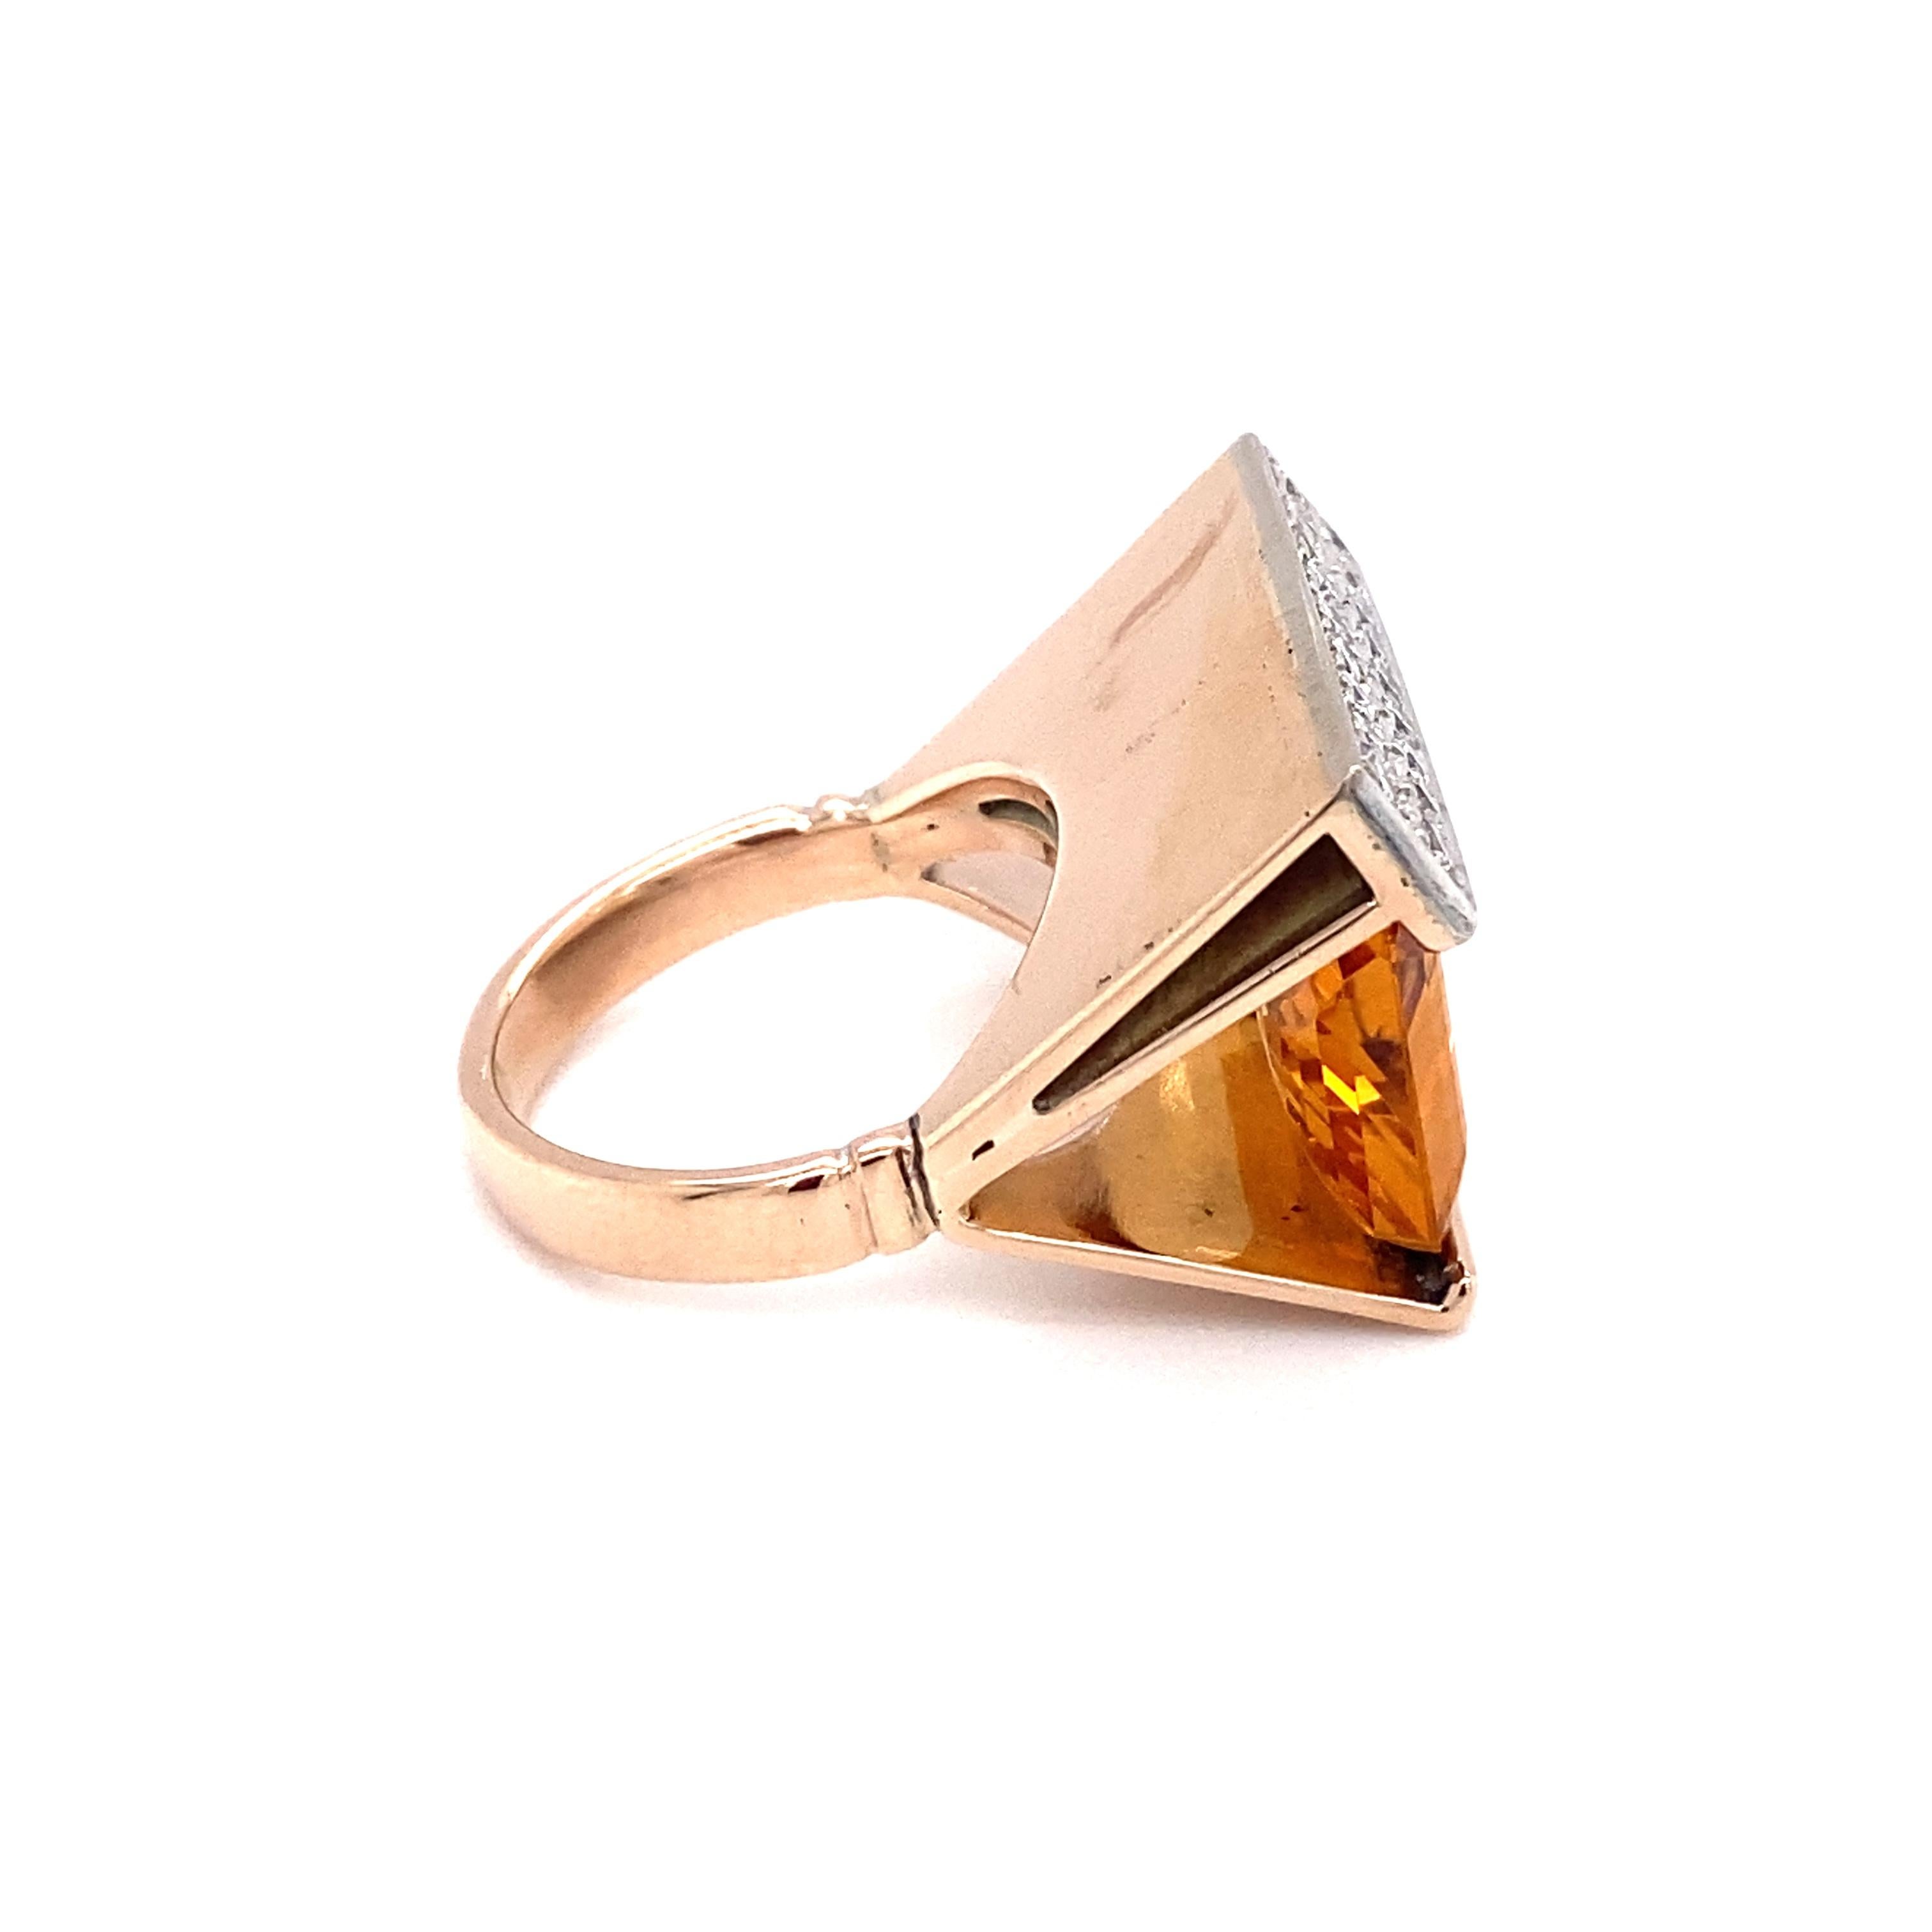 Circa: 1960s
Metal Type: 14 karat yellow gold, with a strong rosy hue
Size: US 6.5
Weight: 14.4g

Diamond Details:

Cut: Round
Carat: 0.50 carat total weight
Color: G
Clarity: VS-SI

Citrine Details:

Cut: Emerald cut
Carat: Approximately 8.7